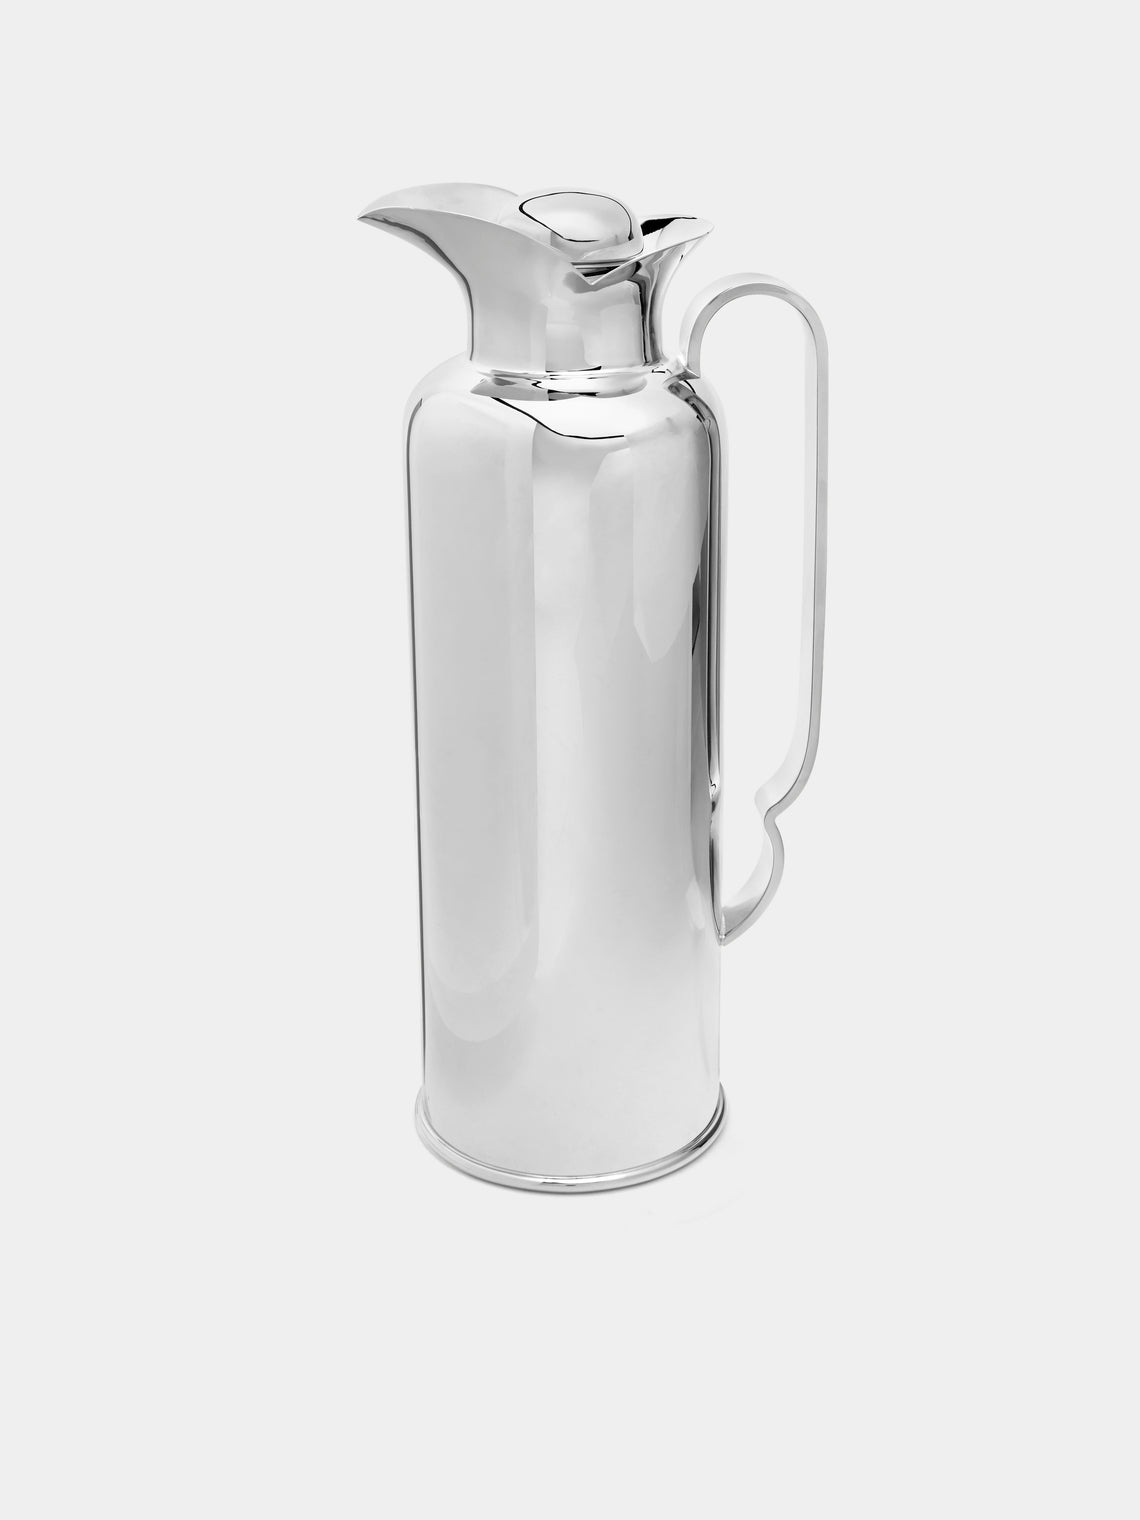 Zanetto - Airone Silver-Plated Thermic Pitcher - Silver - ABASK - 